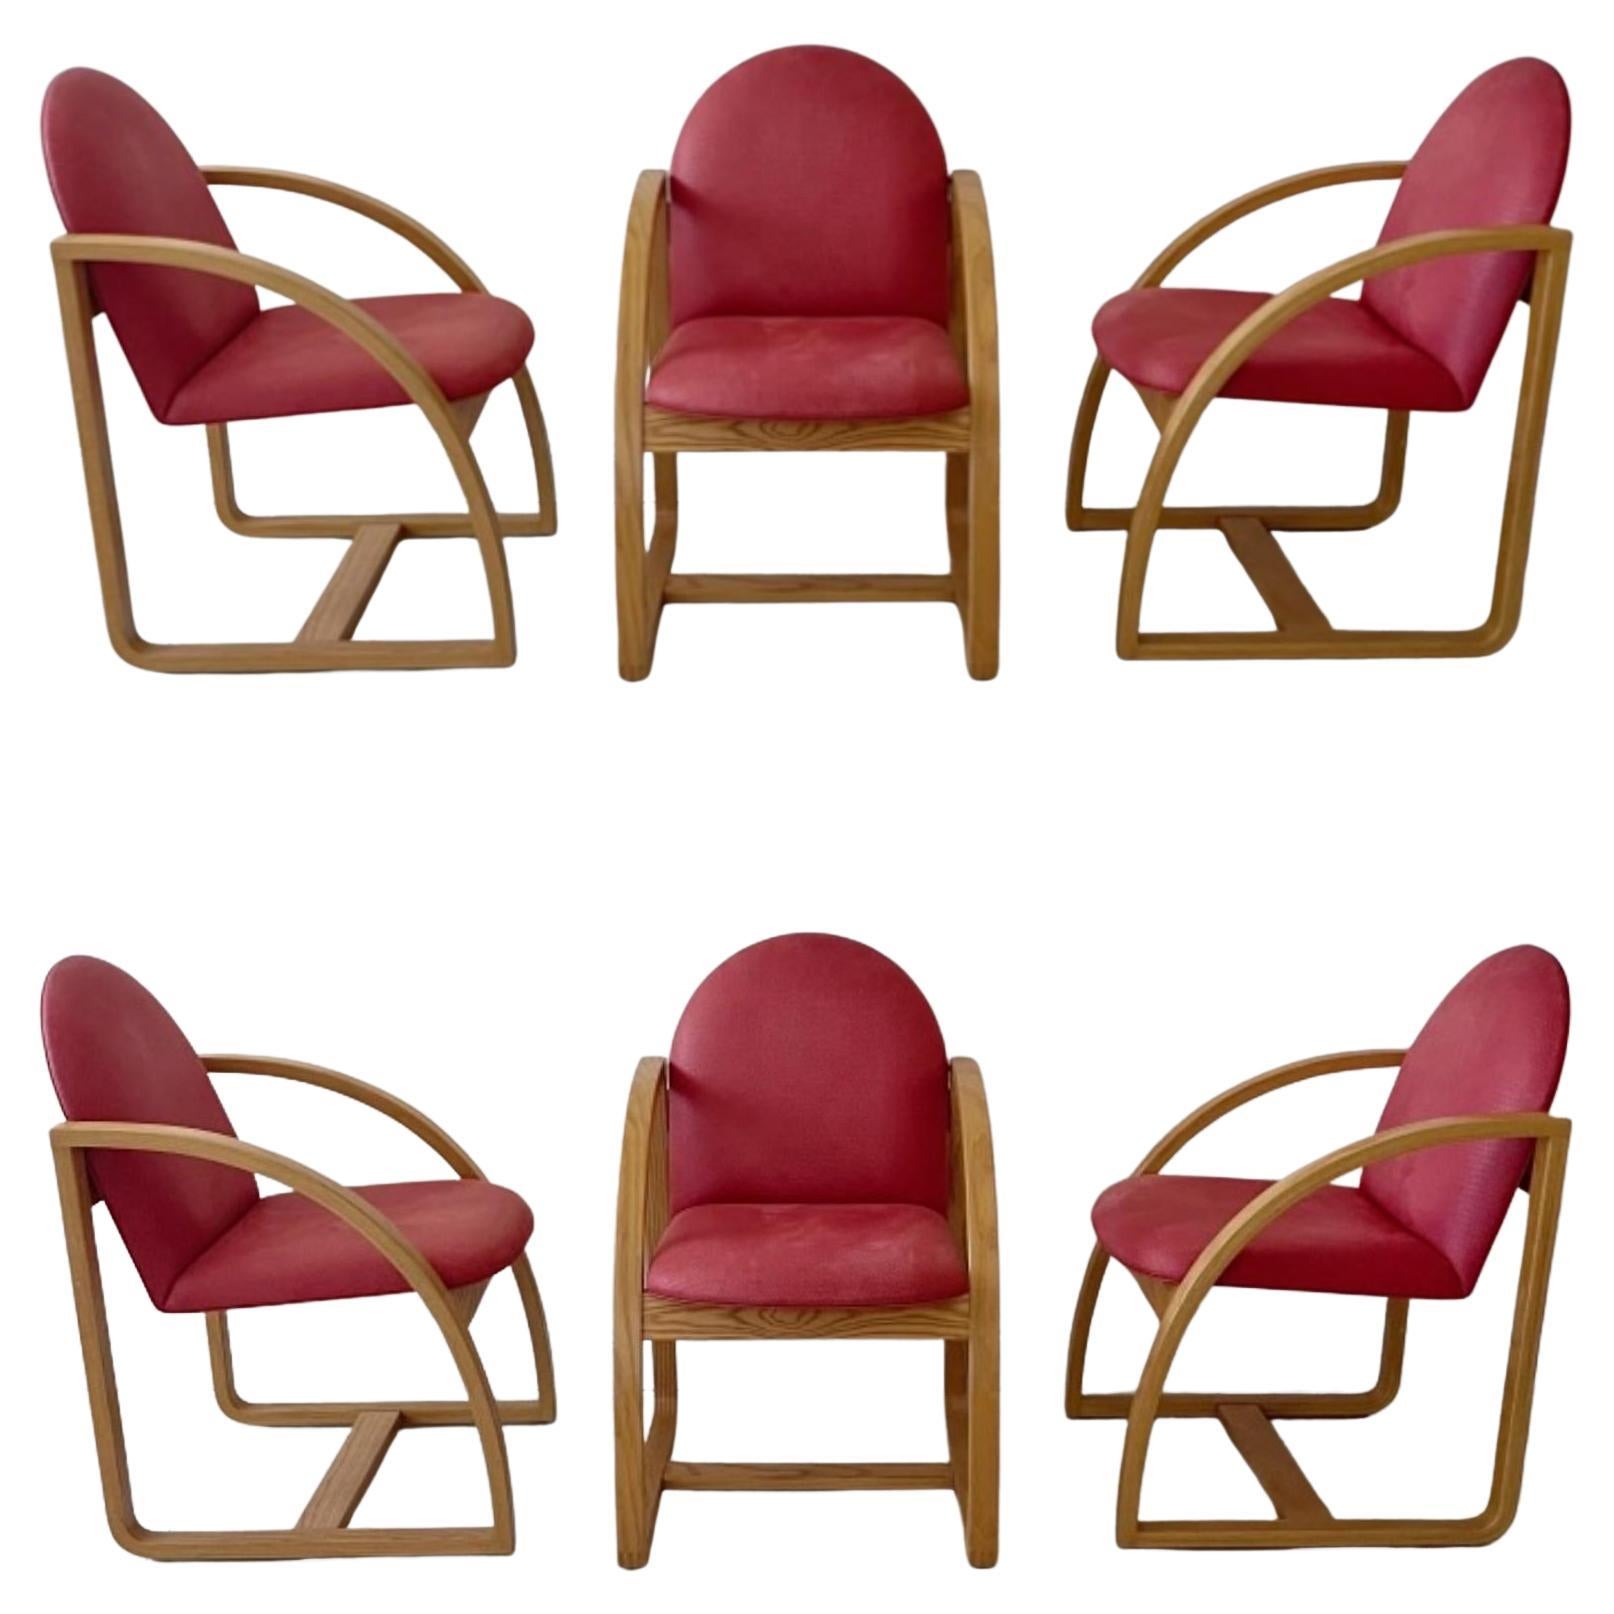 Set Six "Clyde's" Chairs by Peter Danko, circa 1980